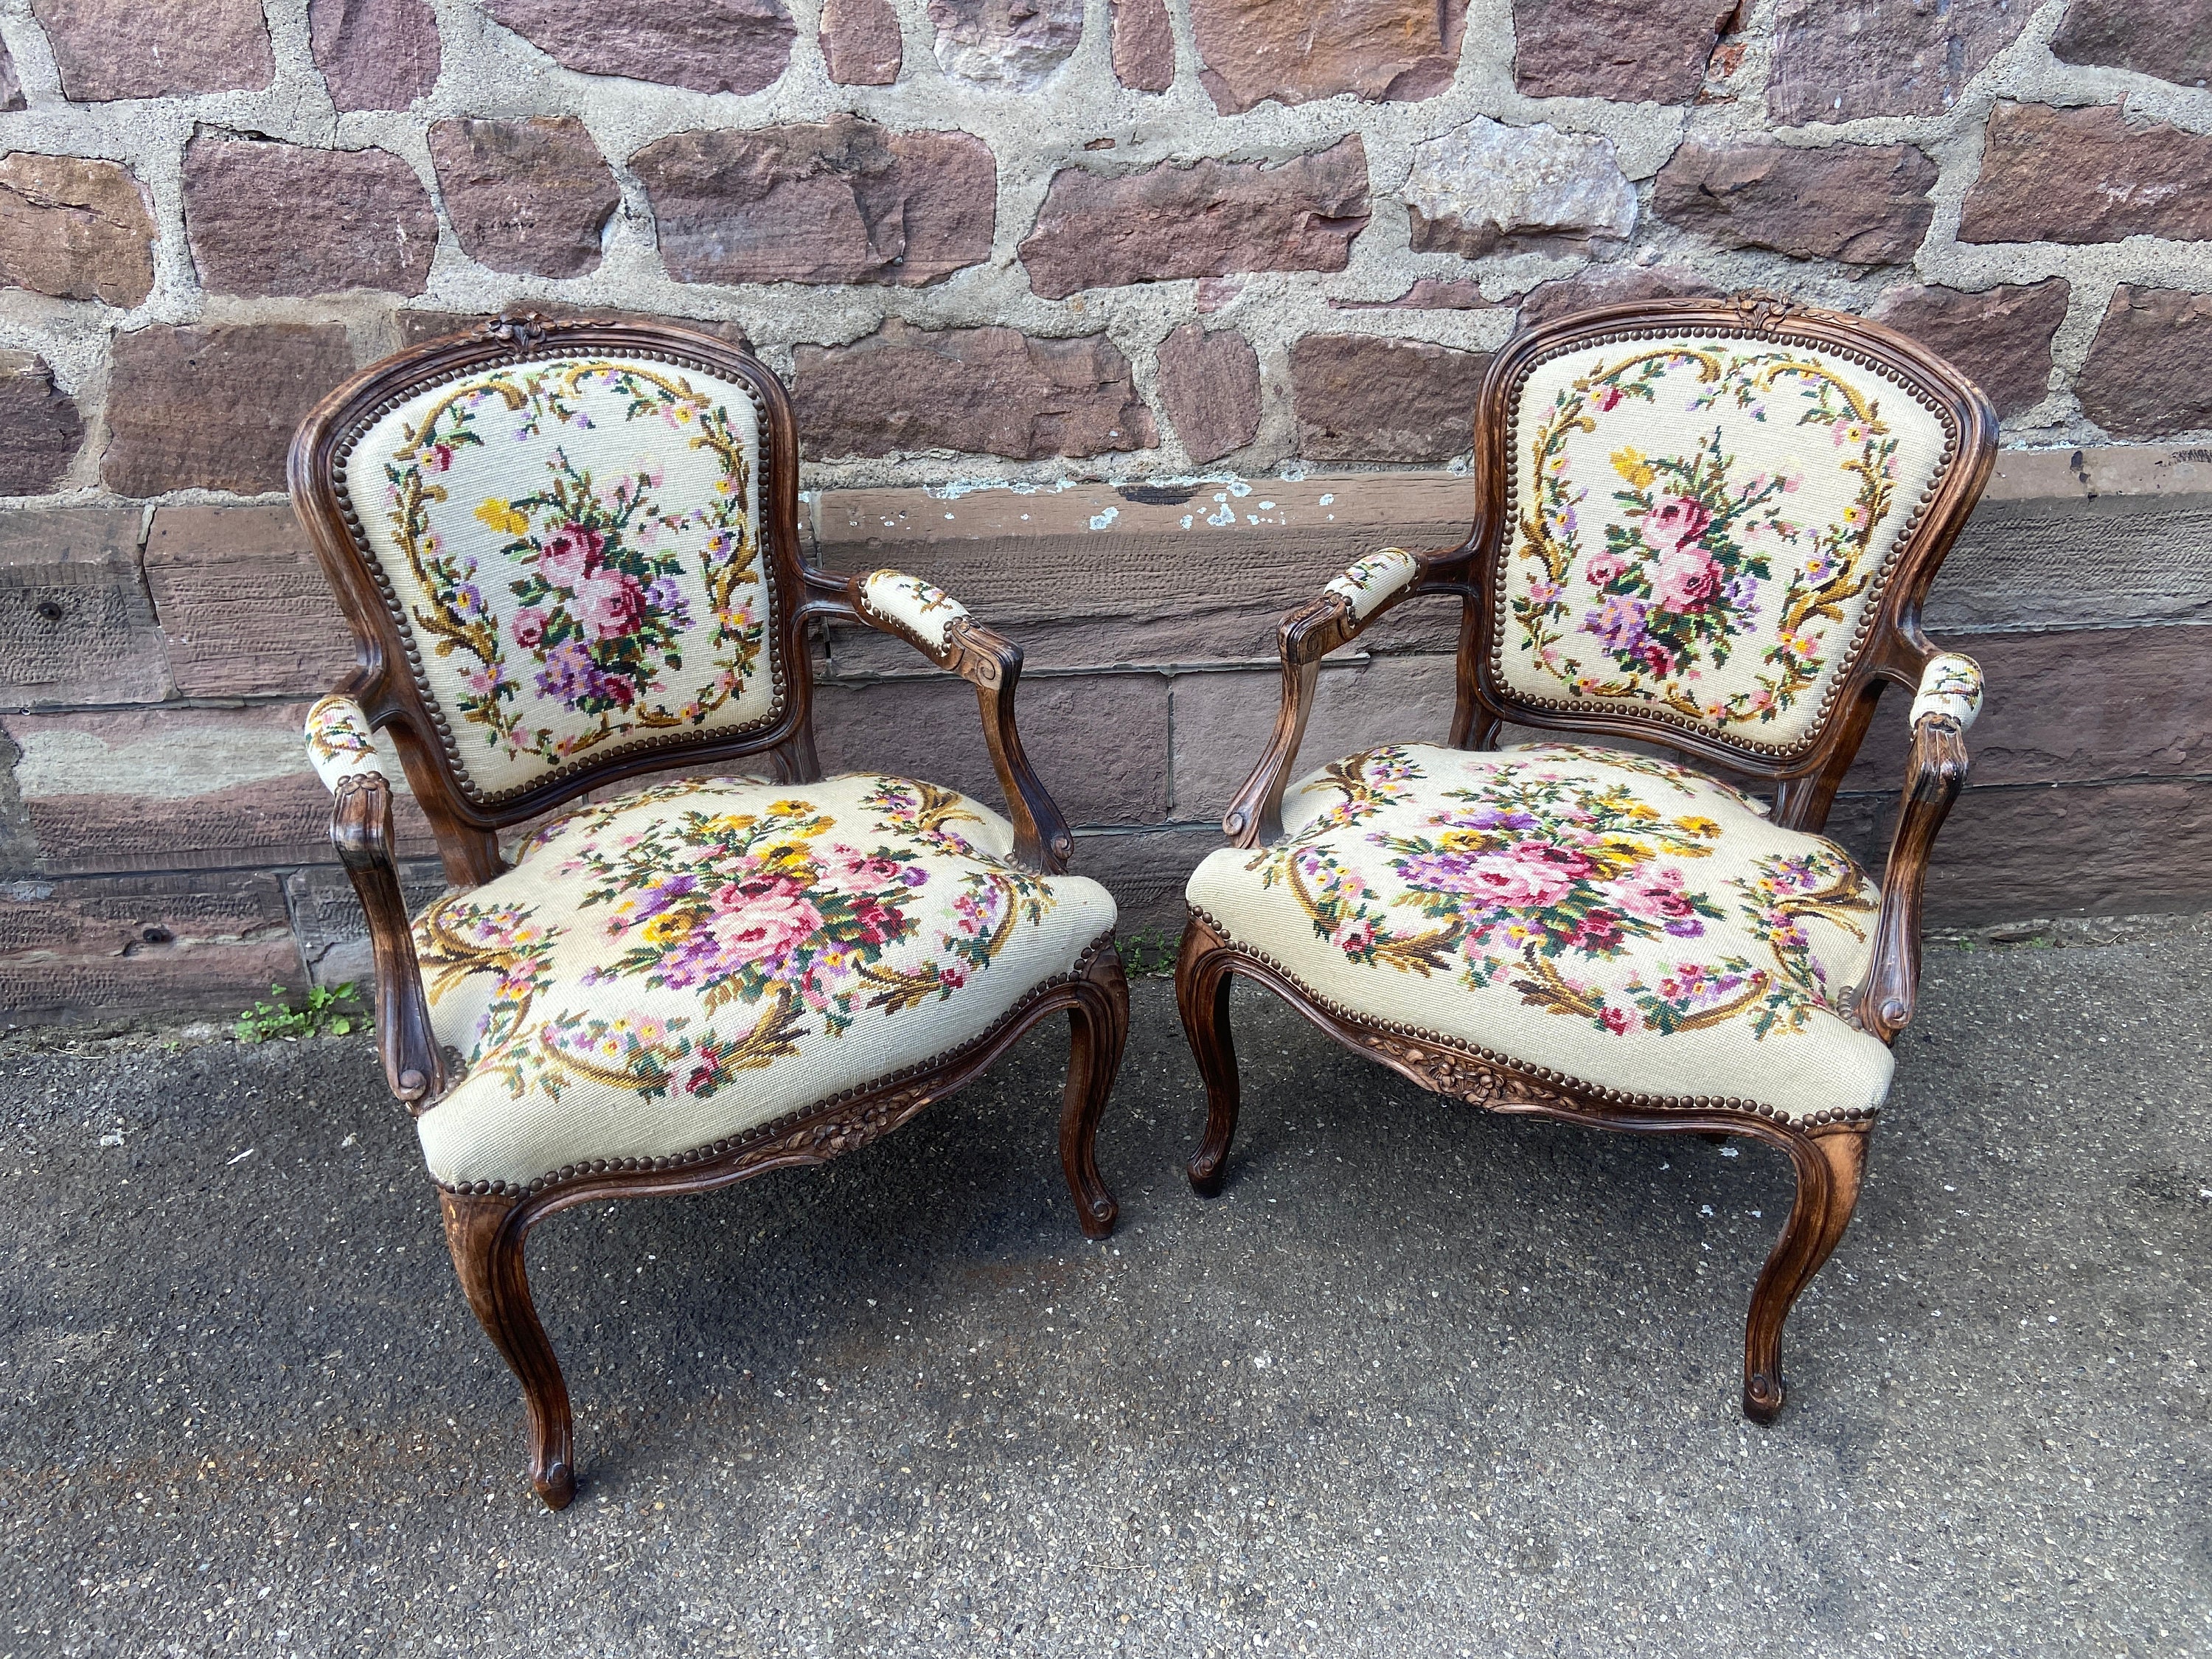 Pair of Louis XIV style chairs - Maison Felice